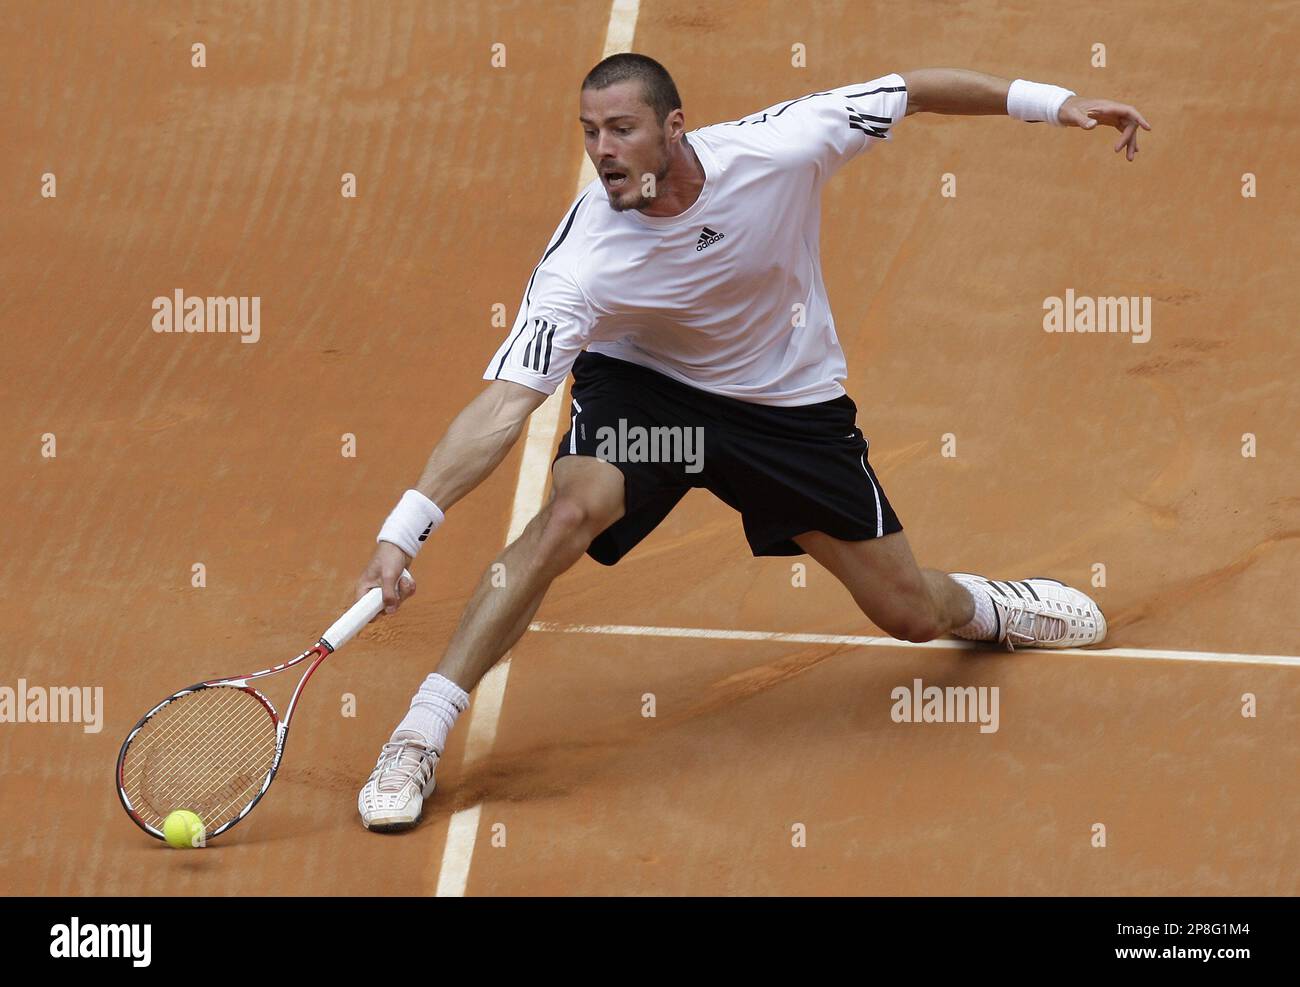 Marat Safin of Russia returns a shot during his match against Jo-Wilfred  Tsonga of France at the Madrid Open Tennis Tournament at the Caja Magica  (Magic Box) in Madrid, Monday May 11,